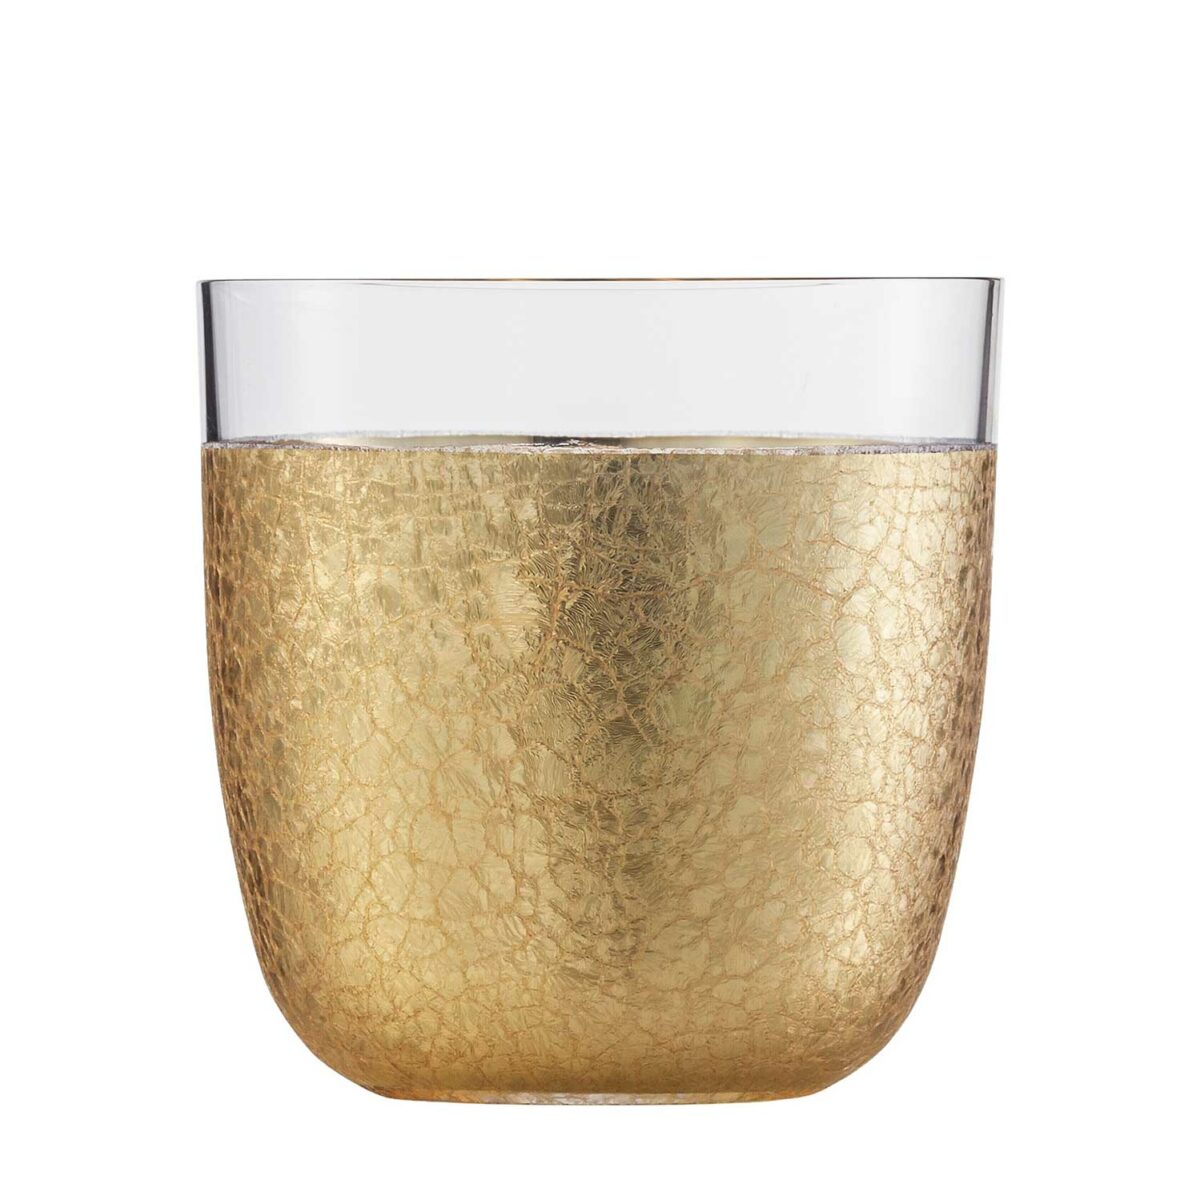 GOLD RUSH 2 cups